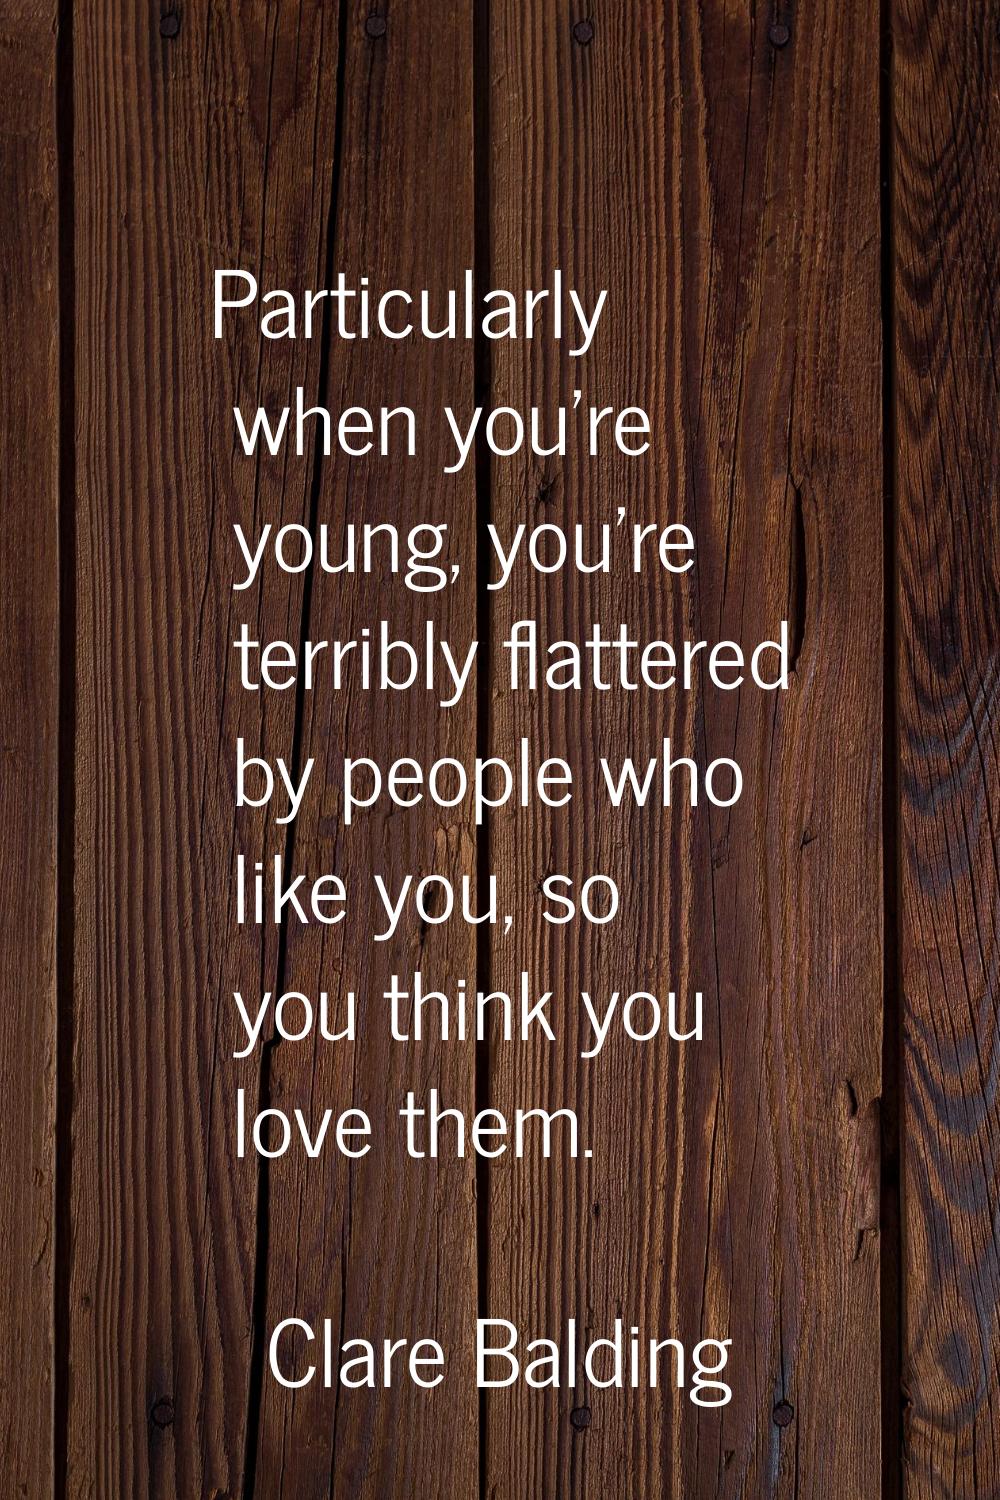 Particularly when you're young, you're terribly flattered by people who like you, so you think you 